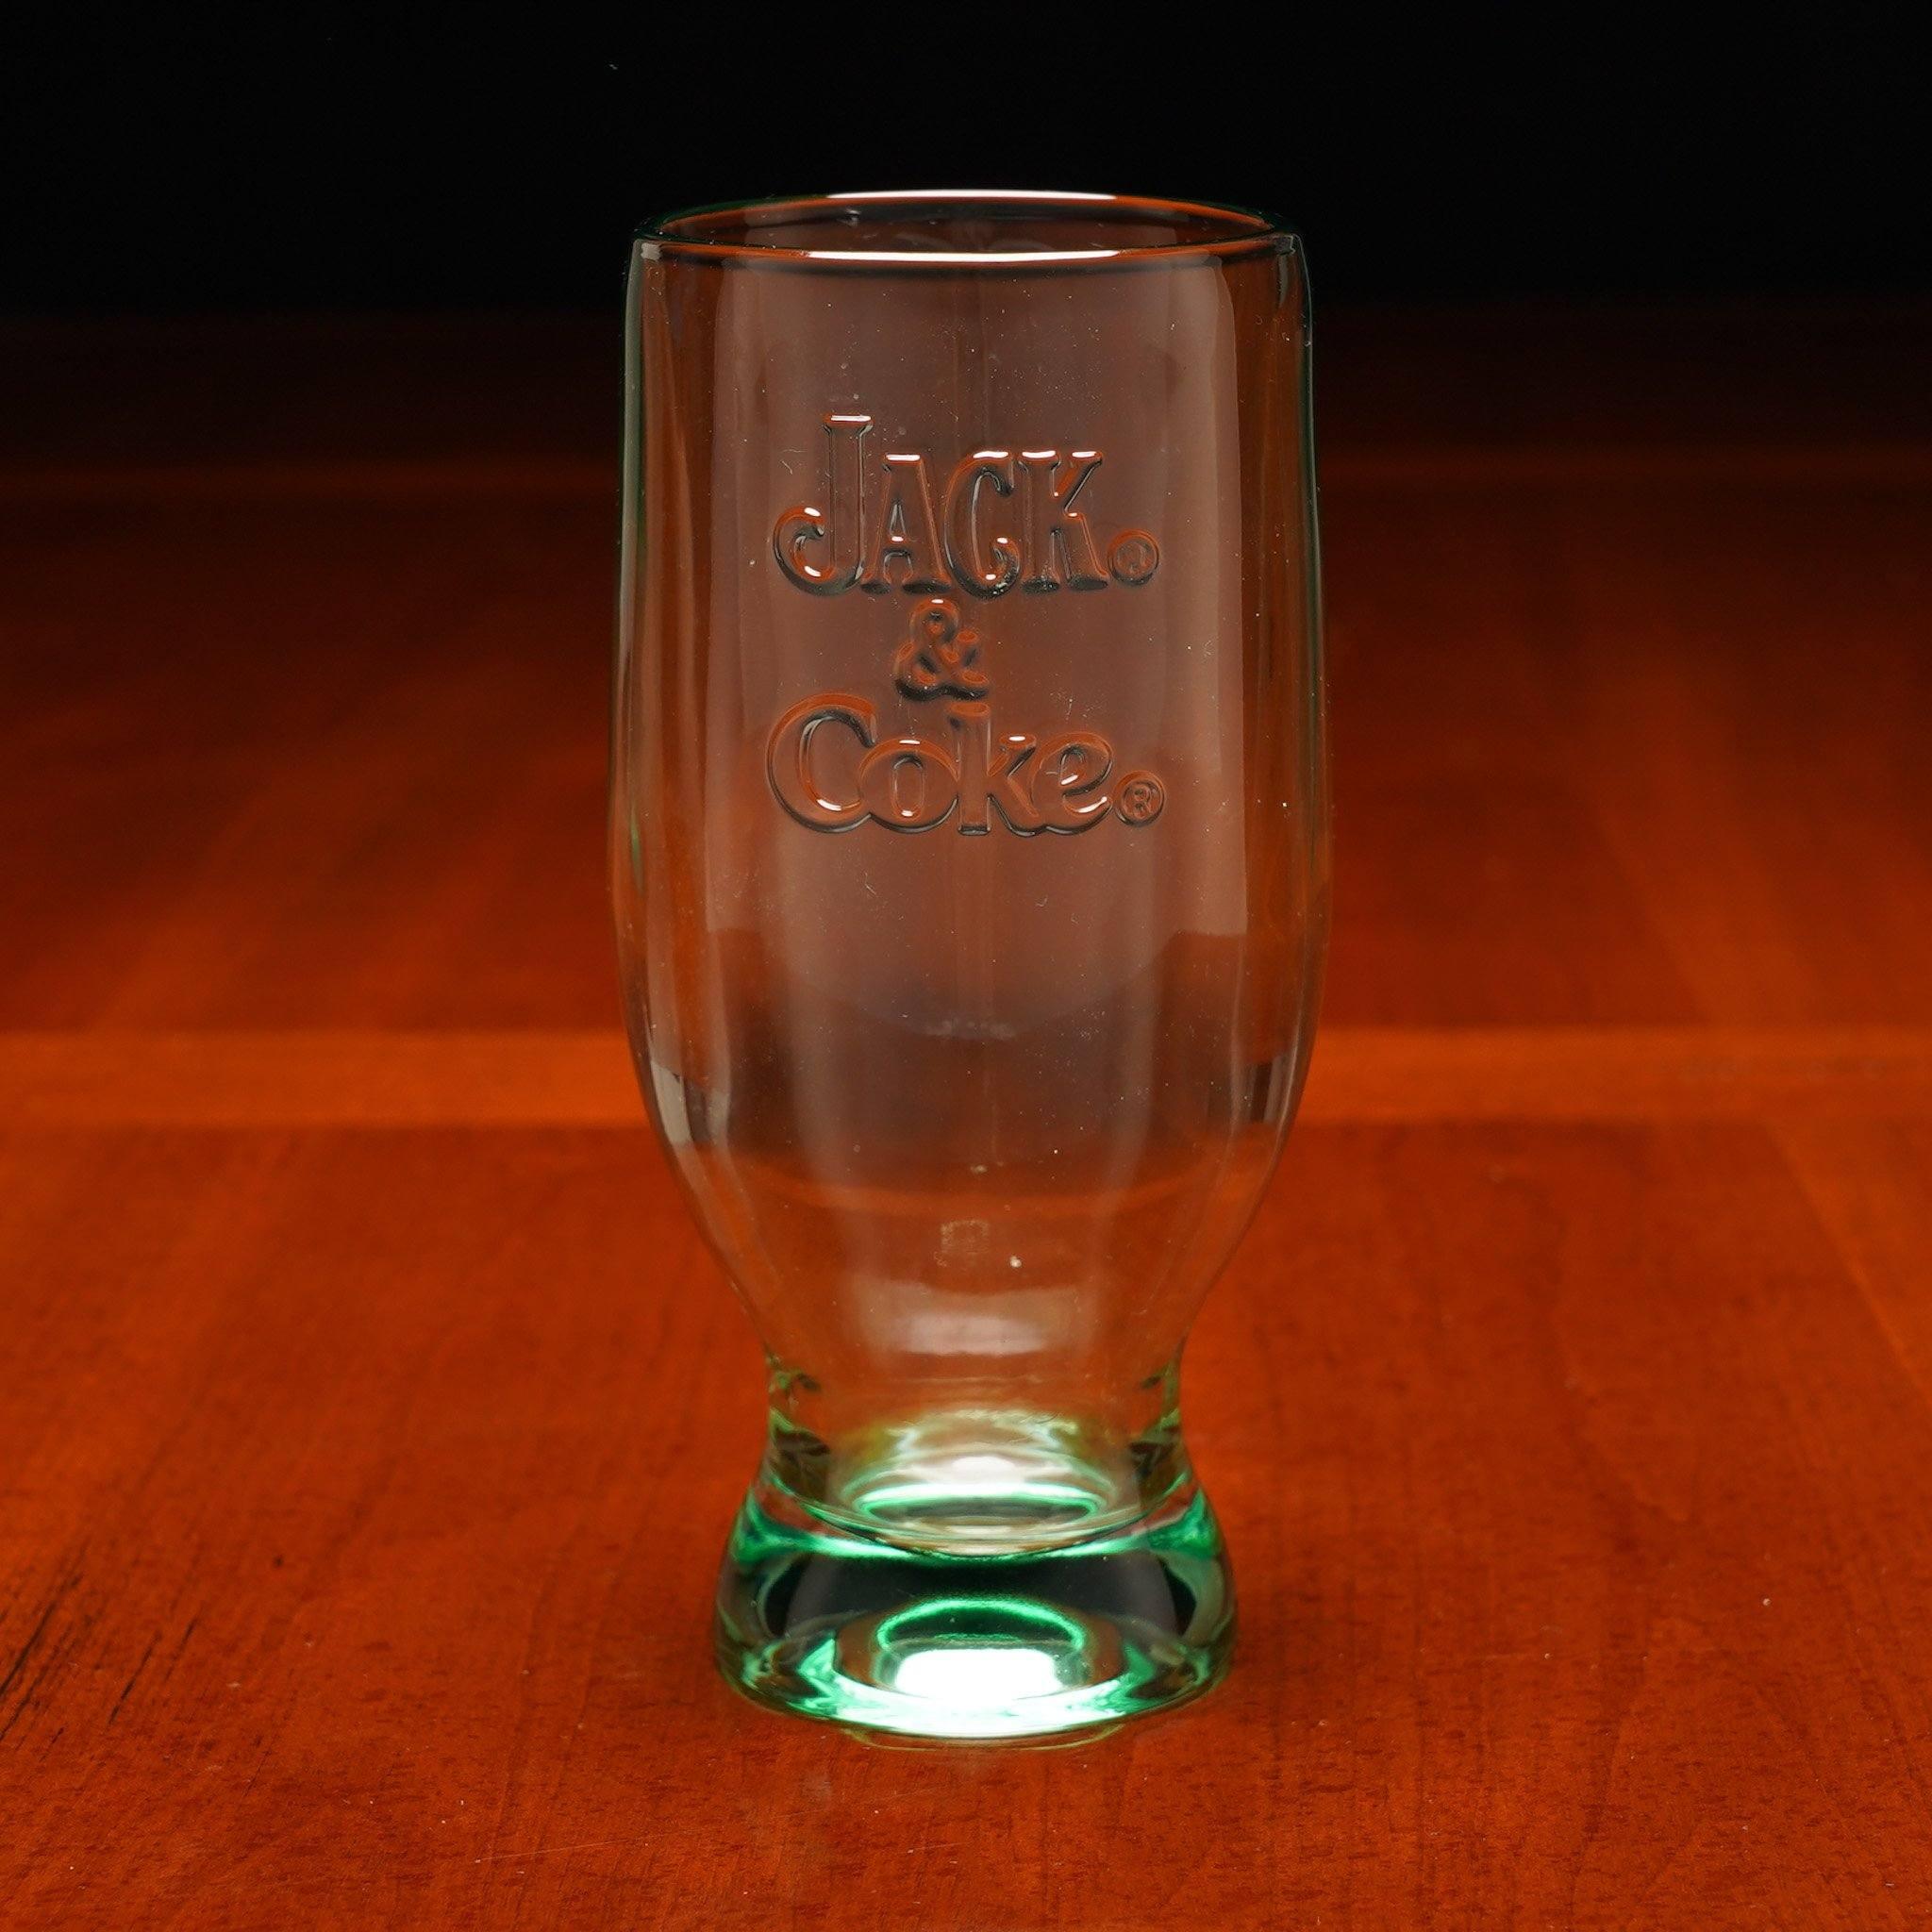 Jack Daniel's Promotional “Jack and Coke” Glass - The Whiskey Cave